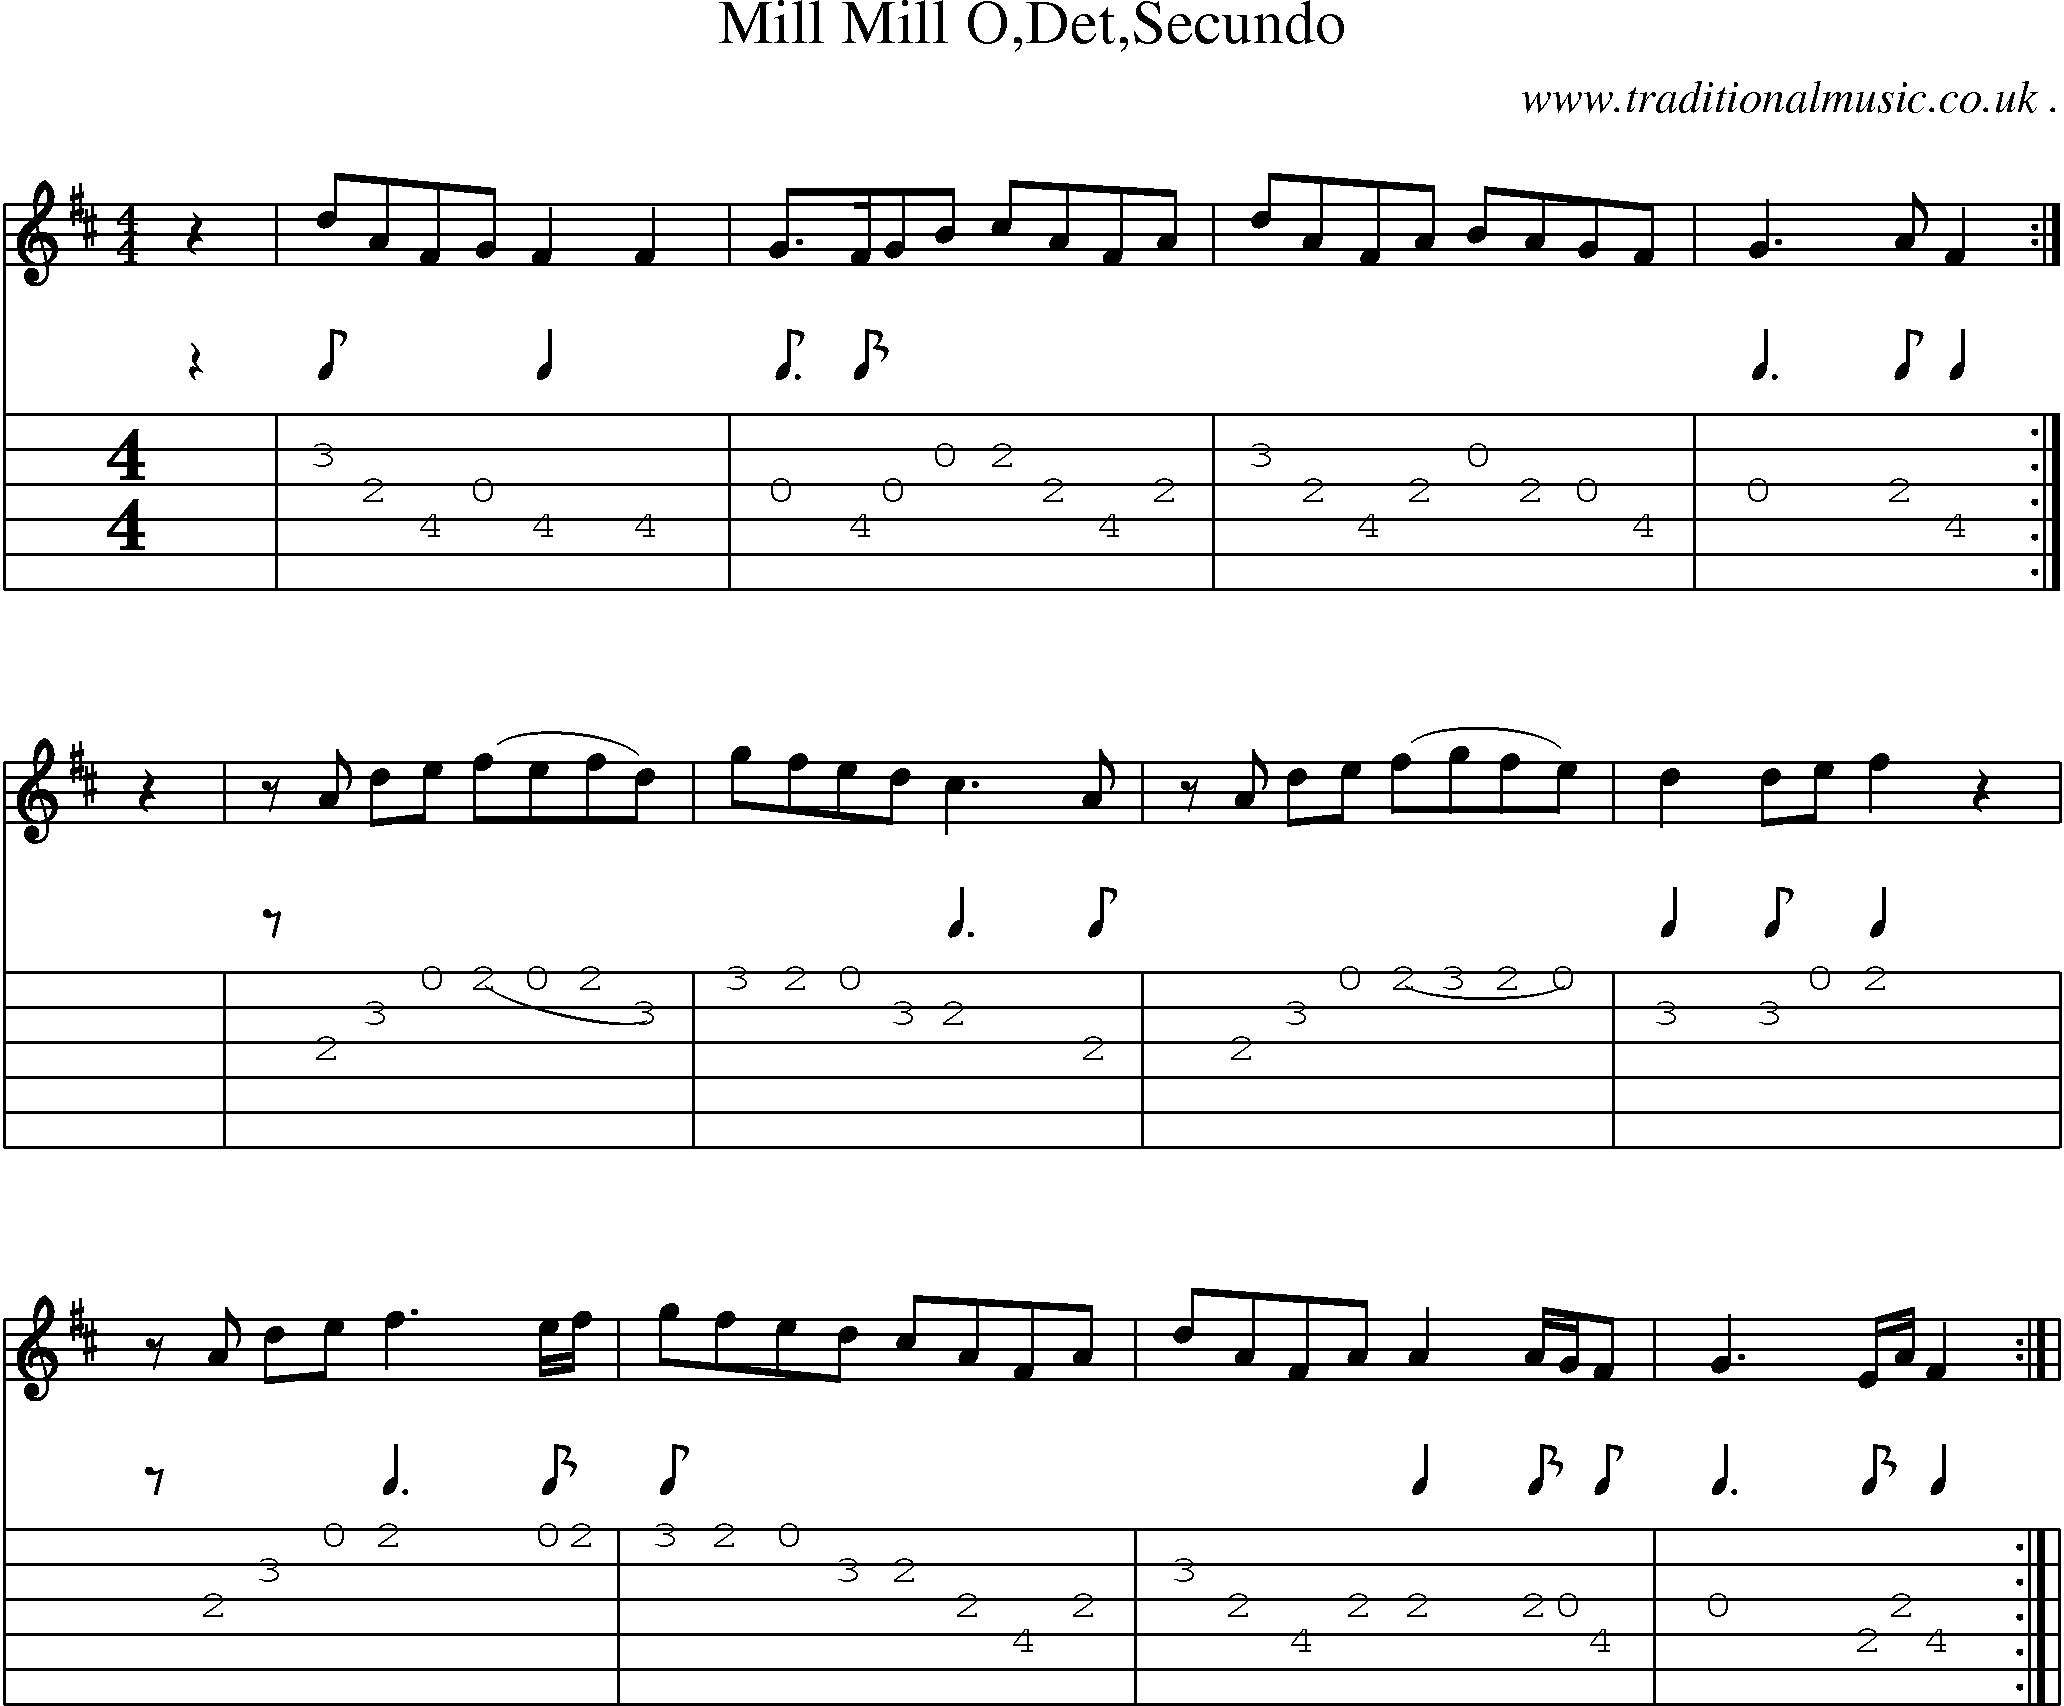 Sheet-Music and Guitar Tabs for Mill Mill Odetsecundo